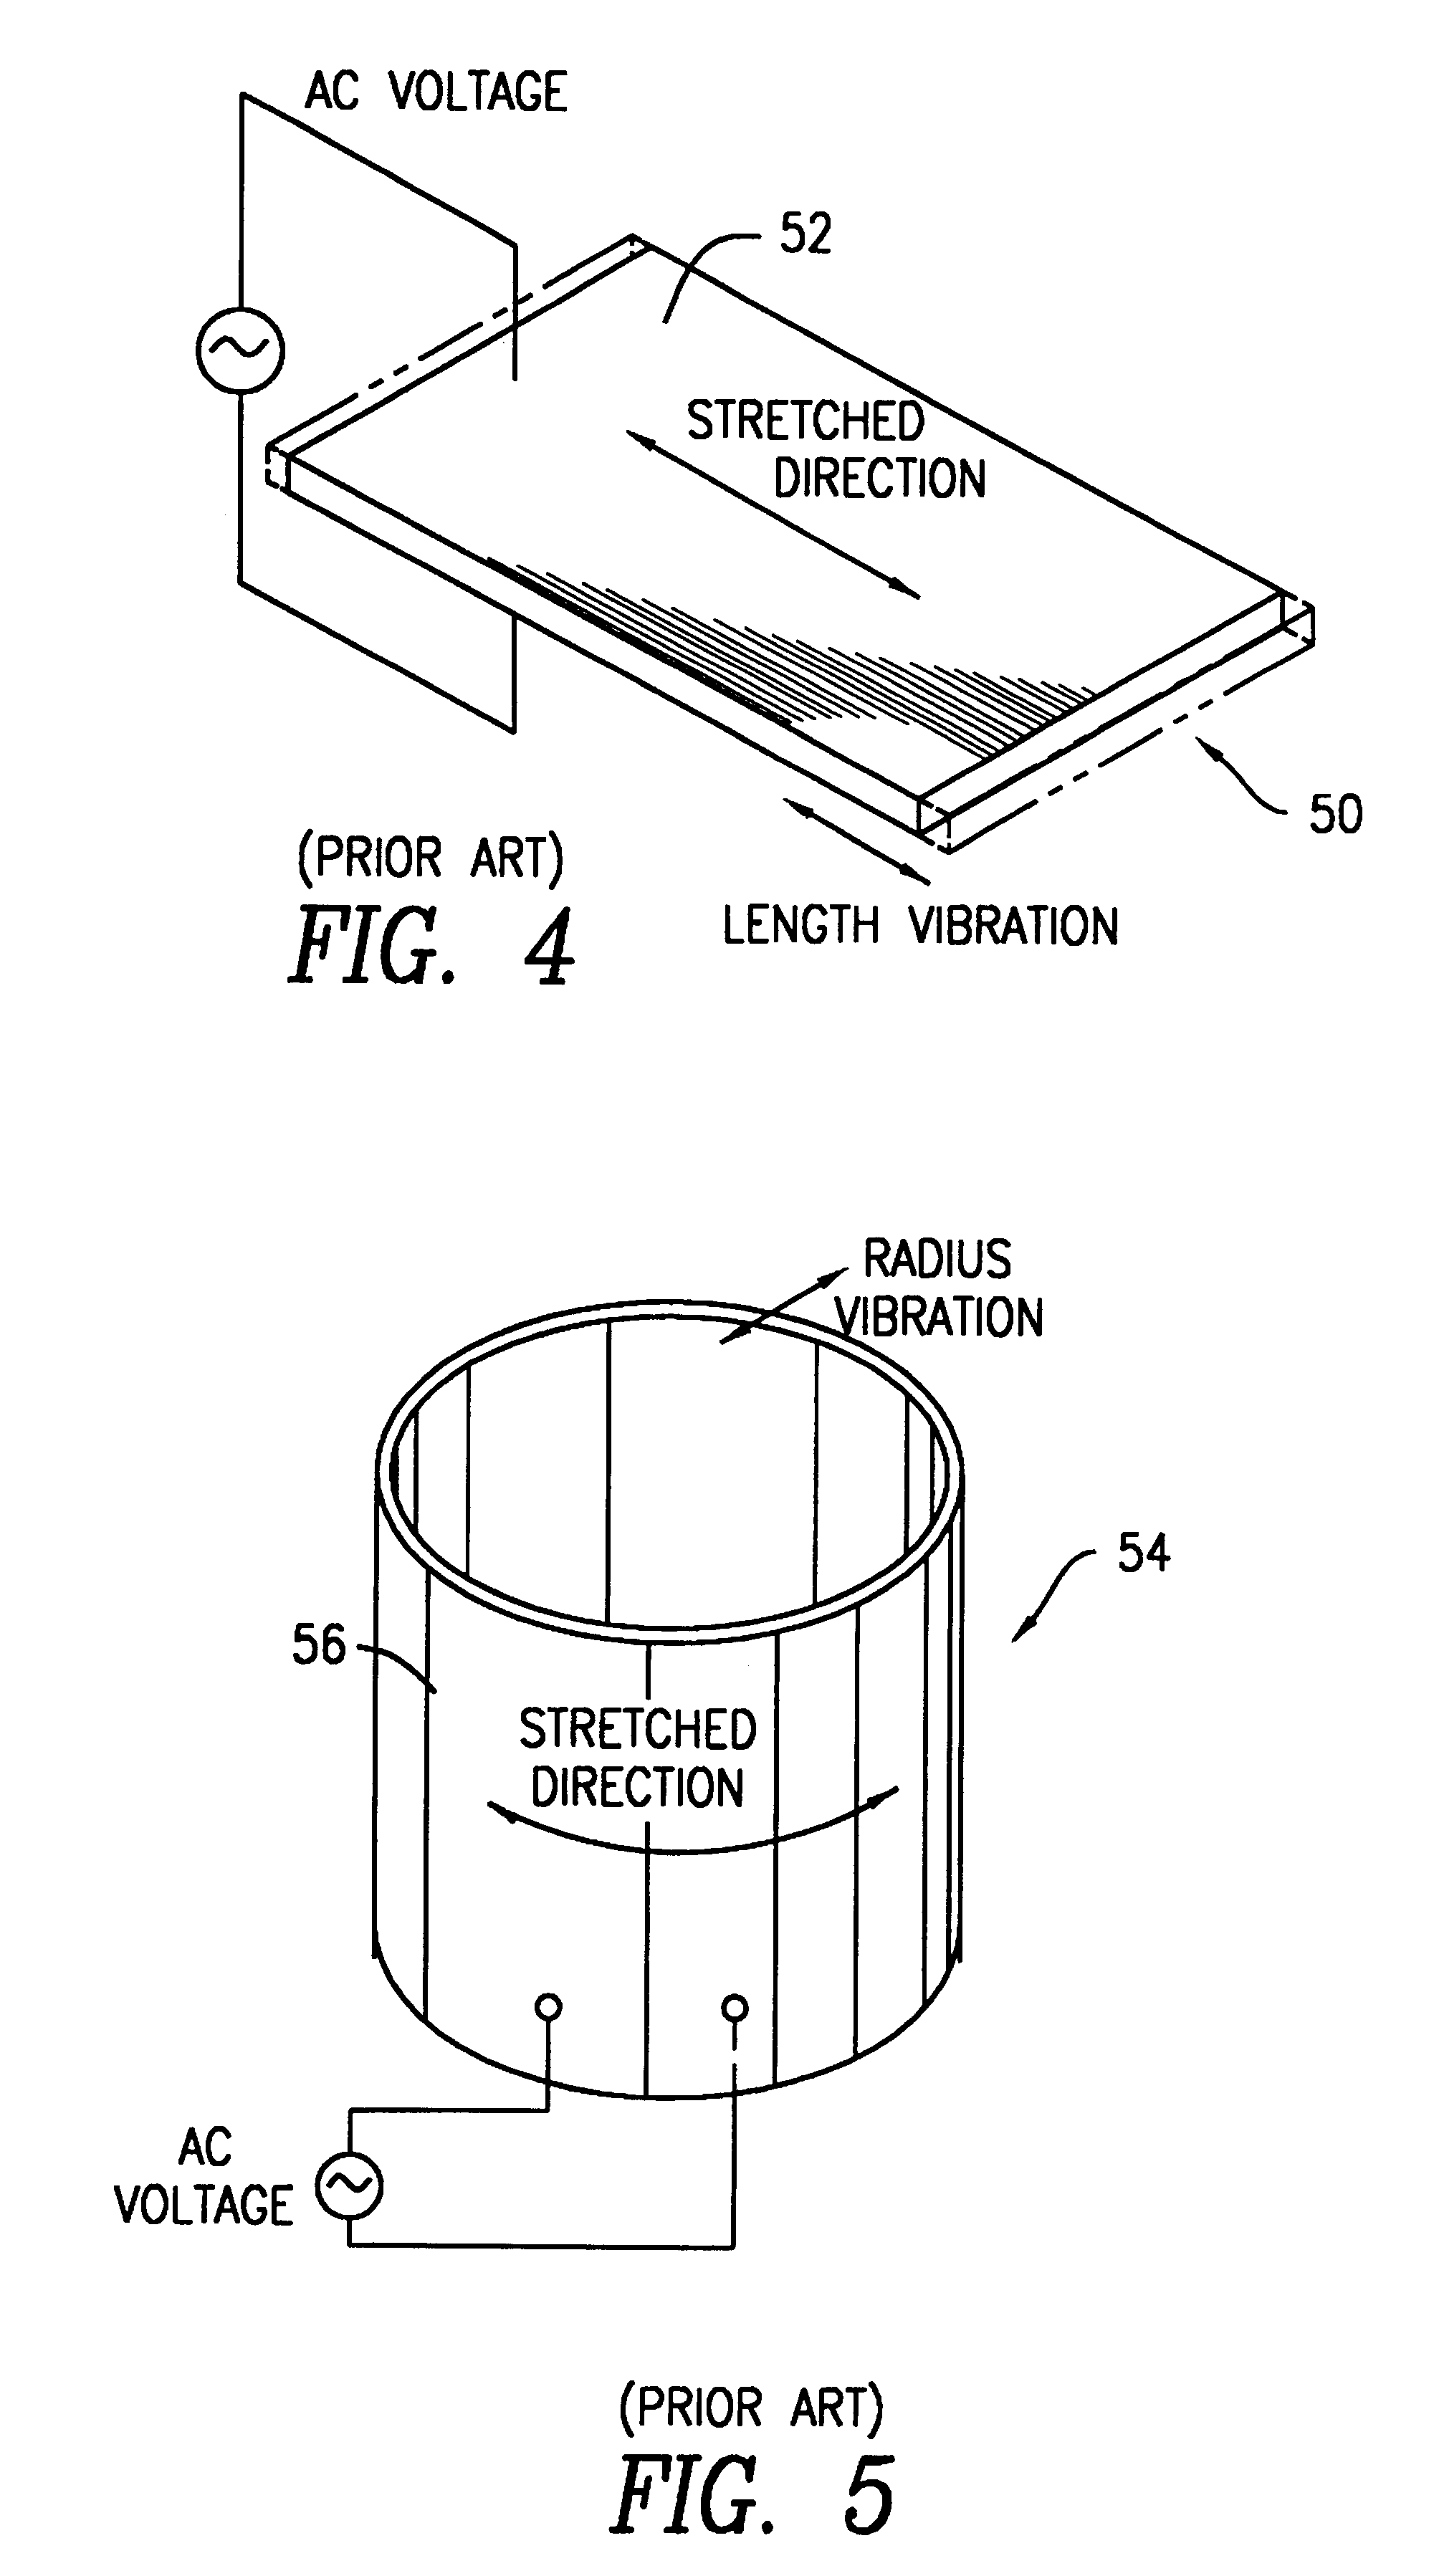 Omni-directional ultrasonic transducer apparatus having controlled frequency response